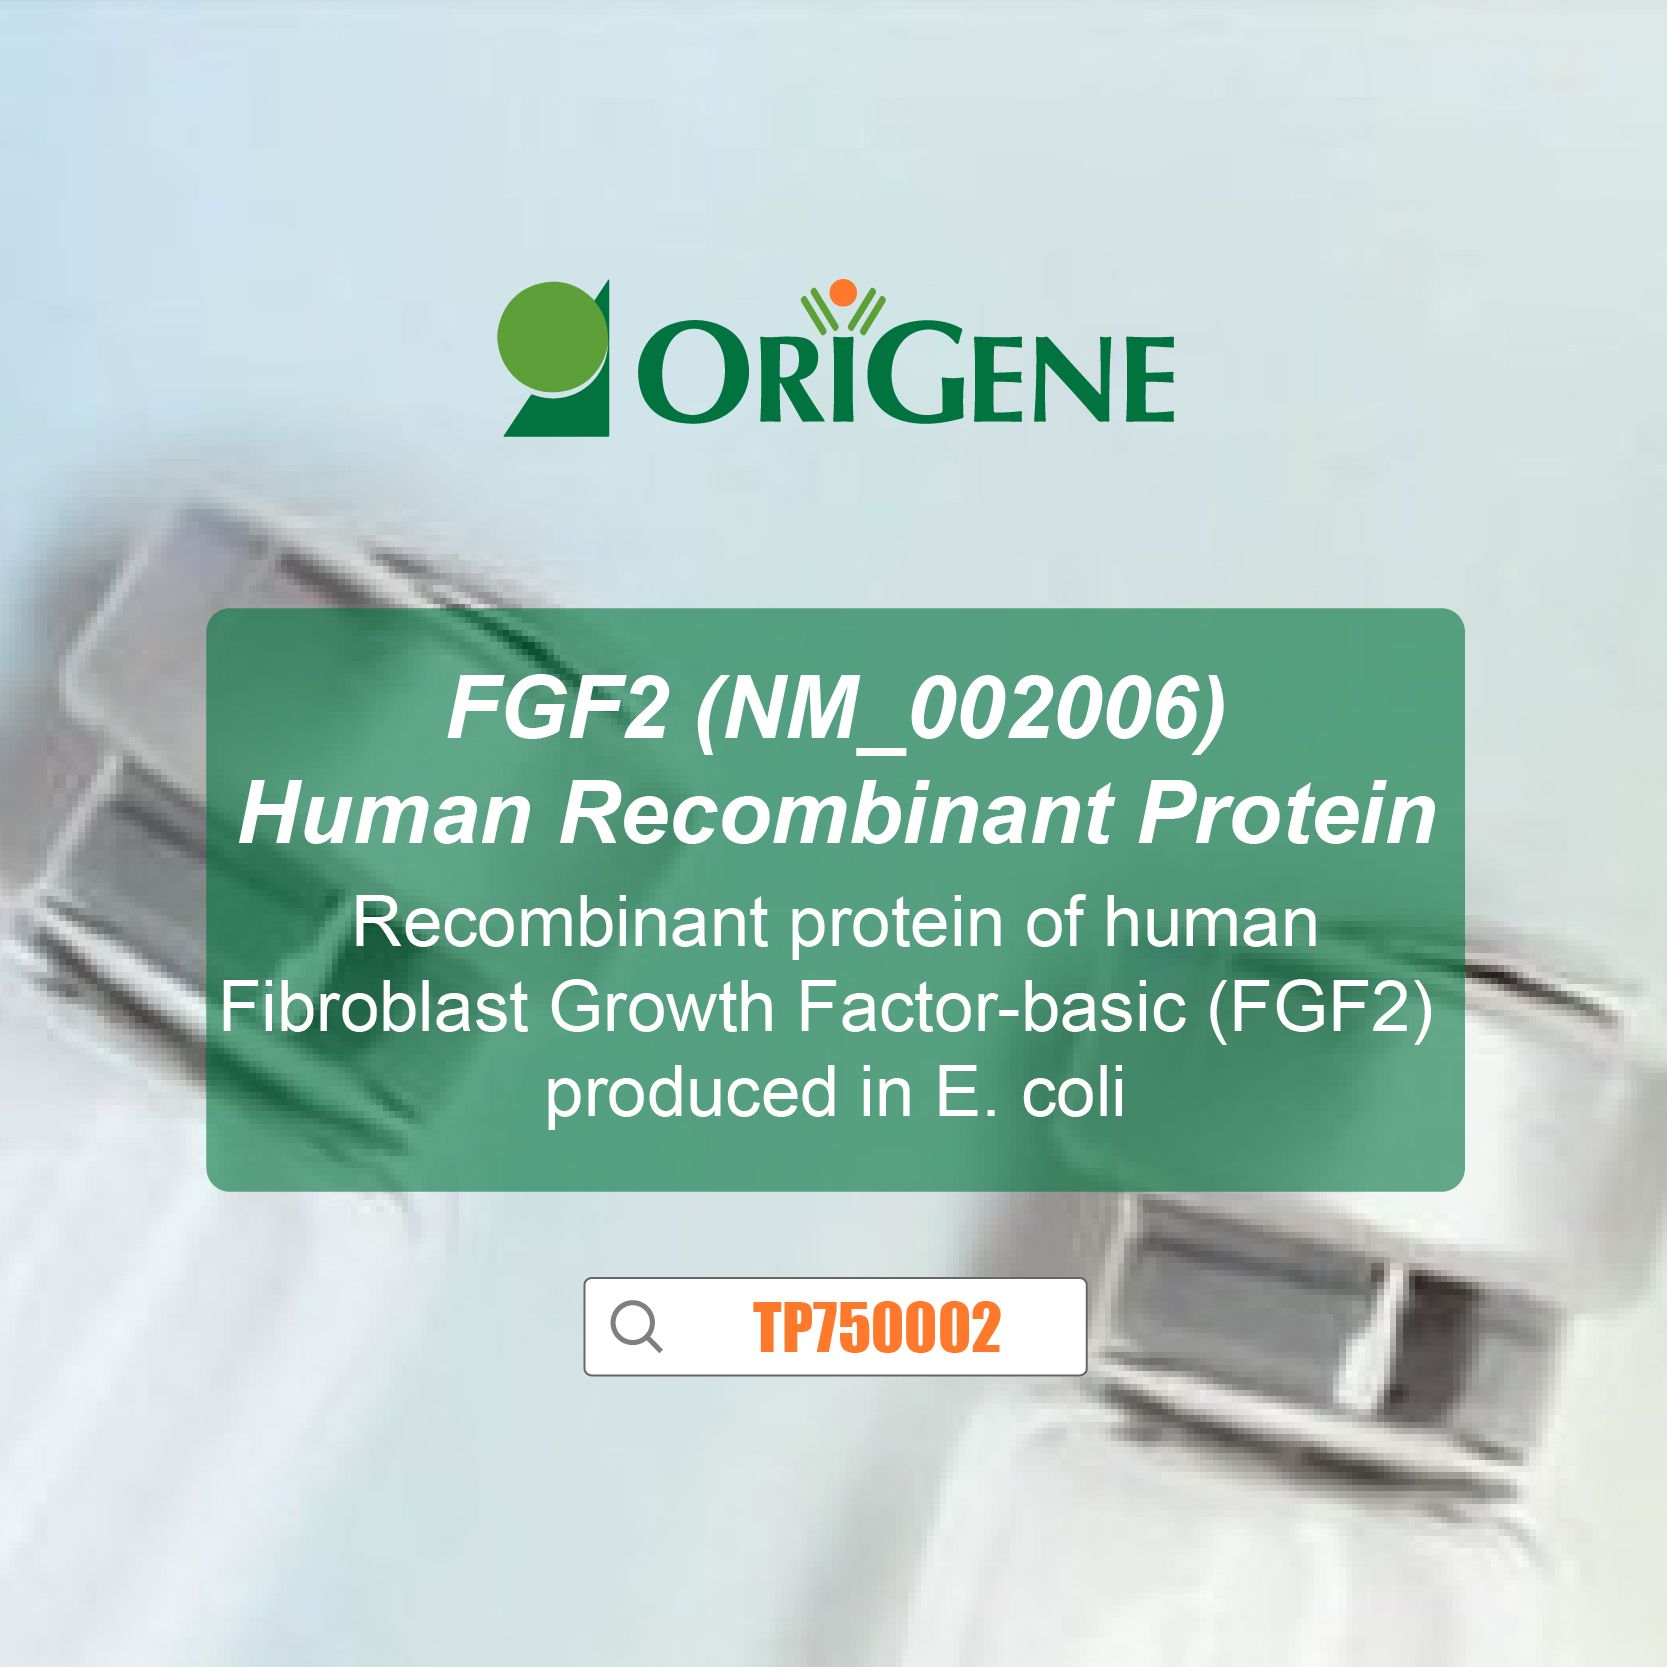 Recombinant protein of human Fibroblast Growth Factor-basic (FGF2) produced in E. coli